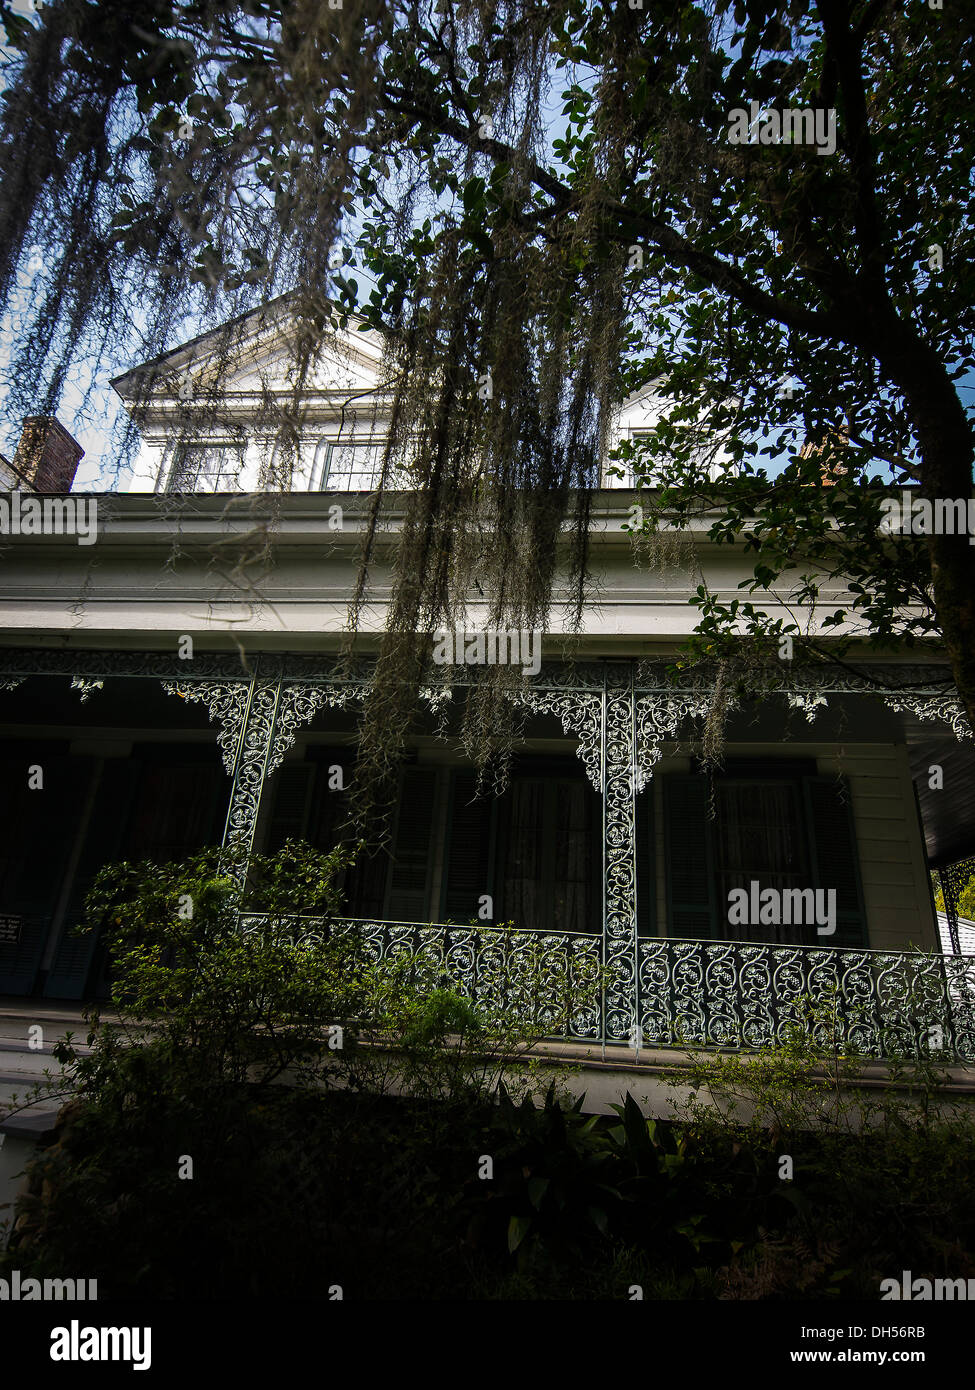 The Myrtles Plantatio off the Mississippi River in Louisiana was built in 1796 over Indian burial, claims most haunted in U.S. Stock Photo